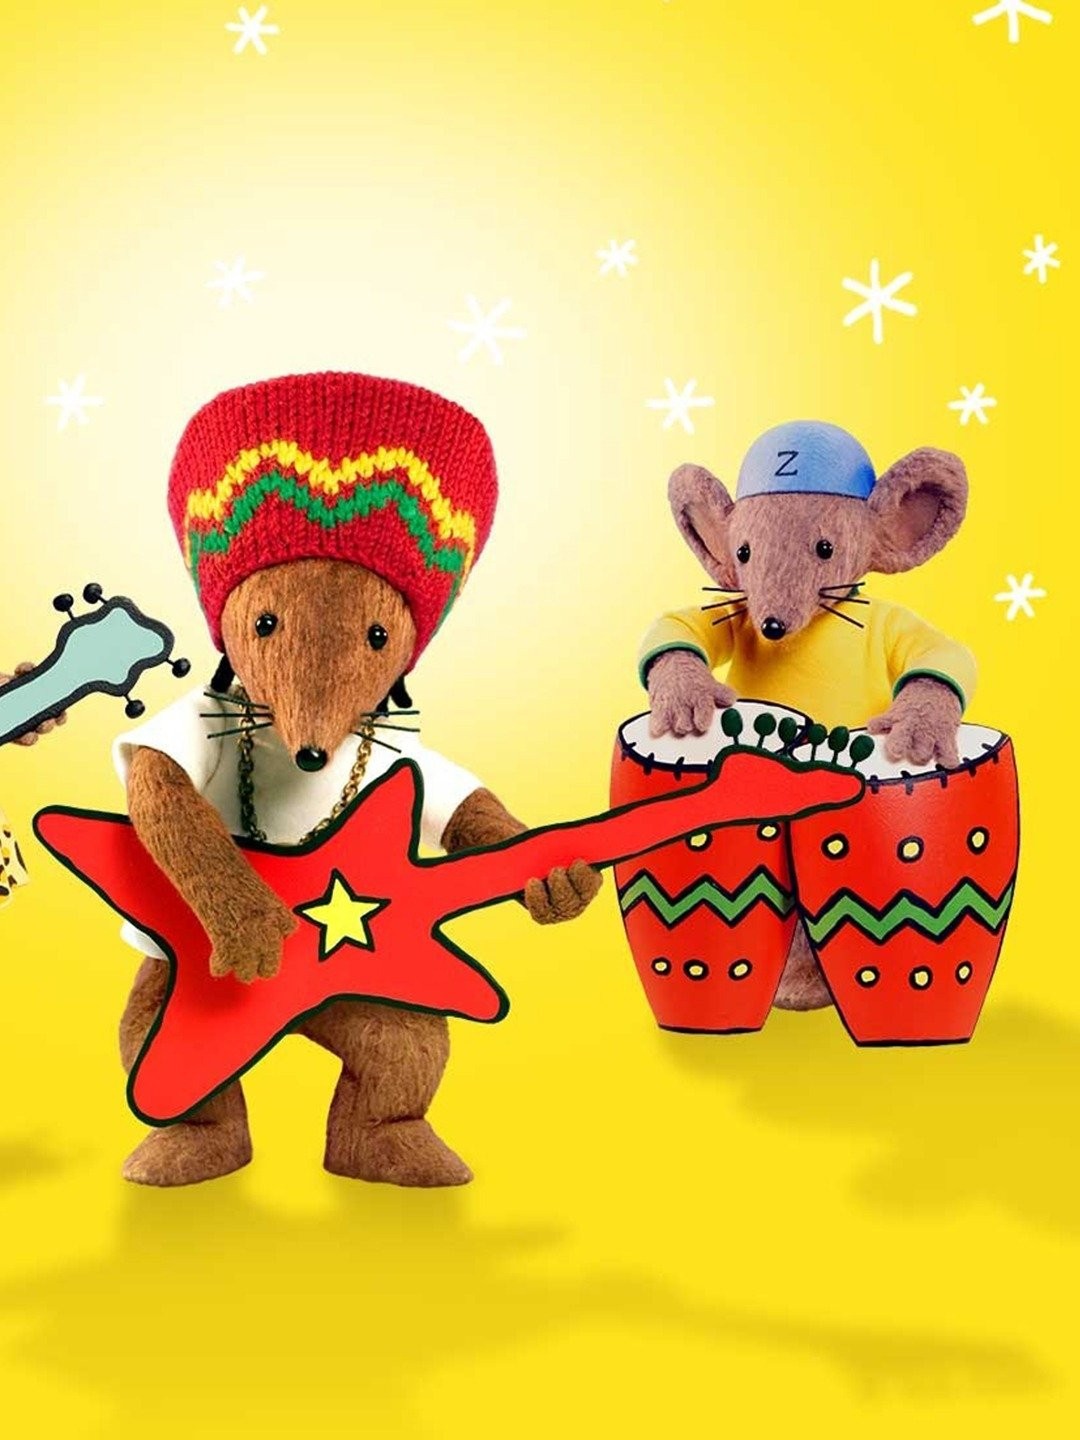 Rastamouse – Skate and Annoy